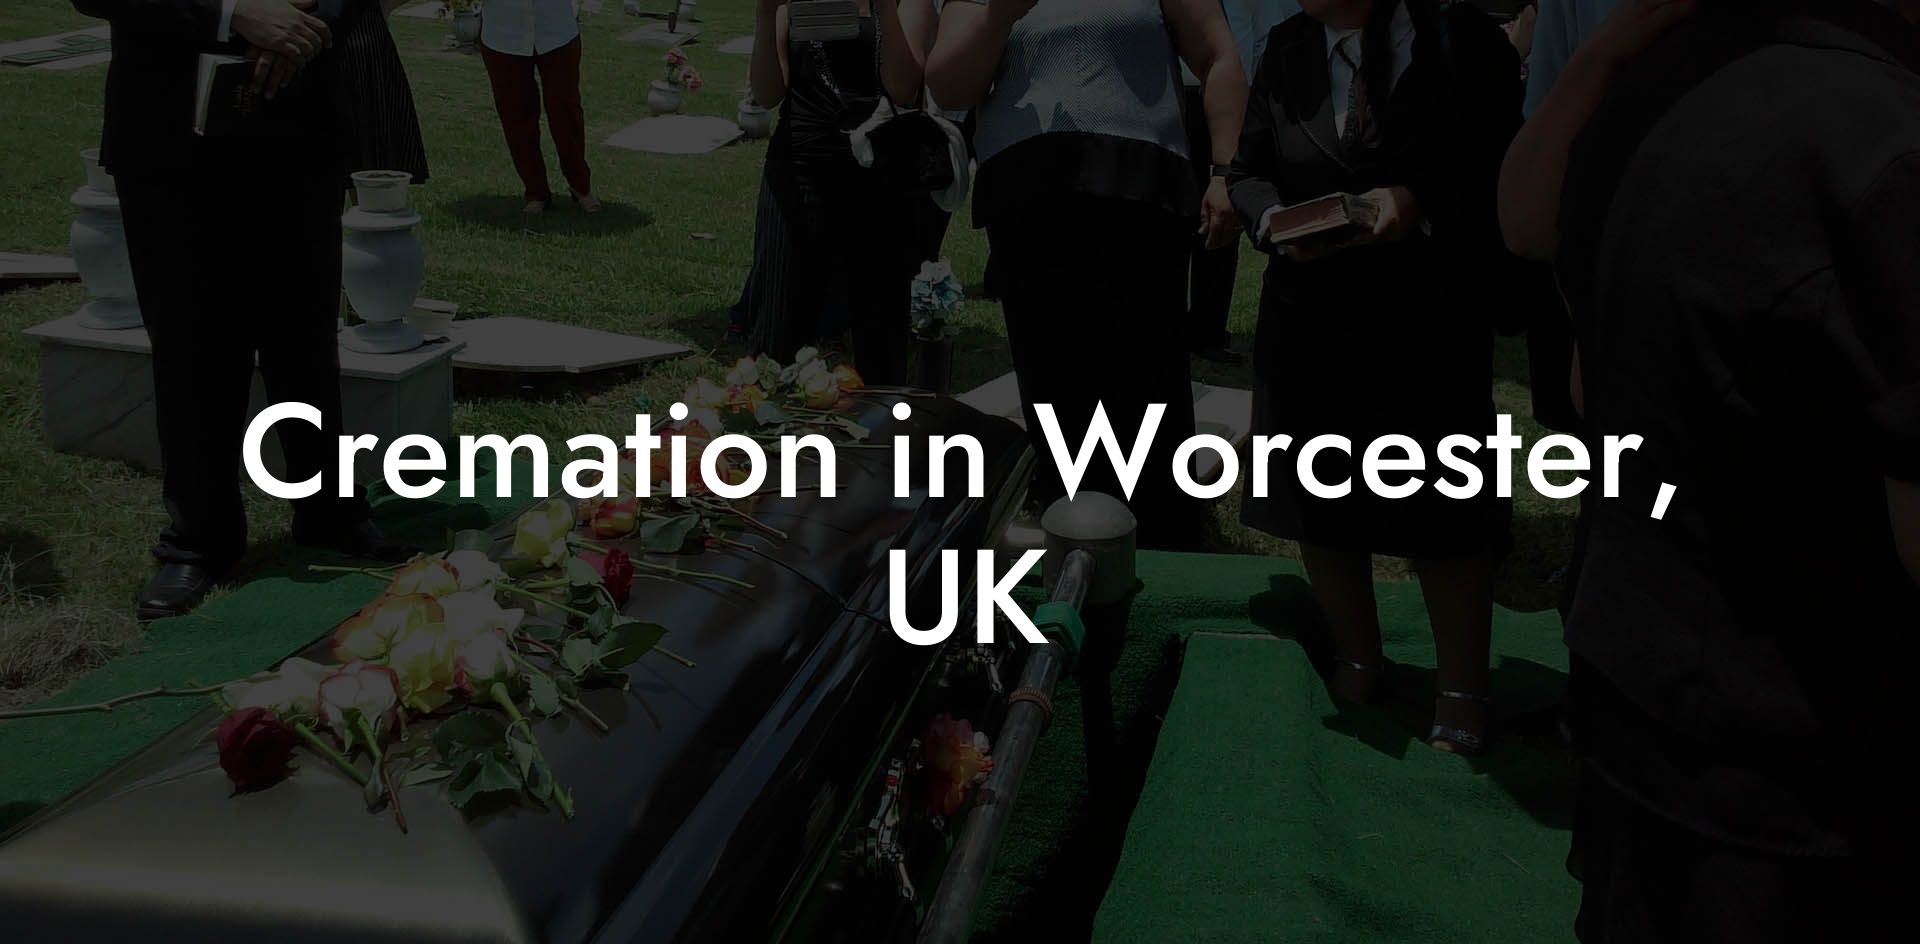 Cremation in Worcester, UK